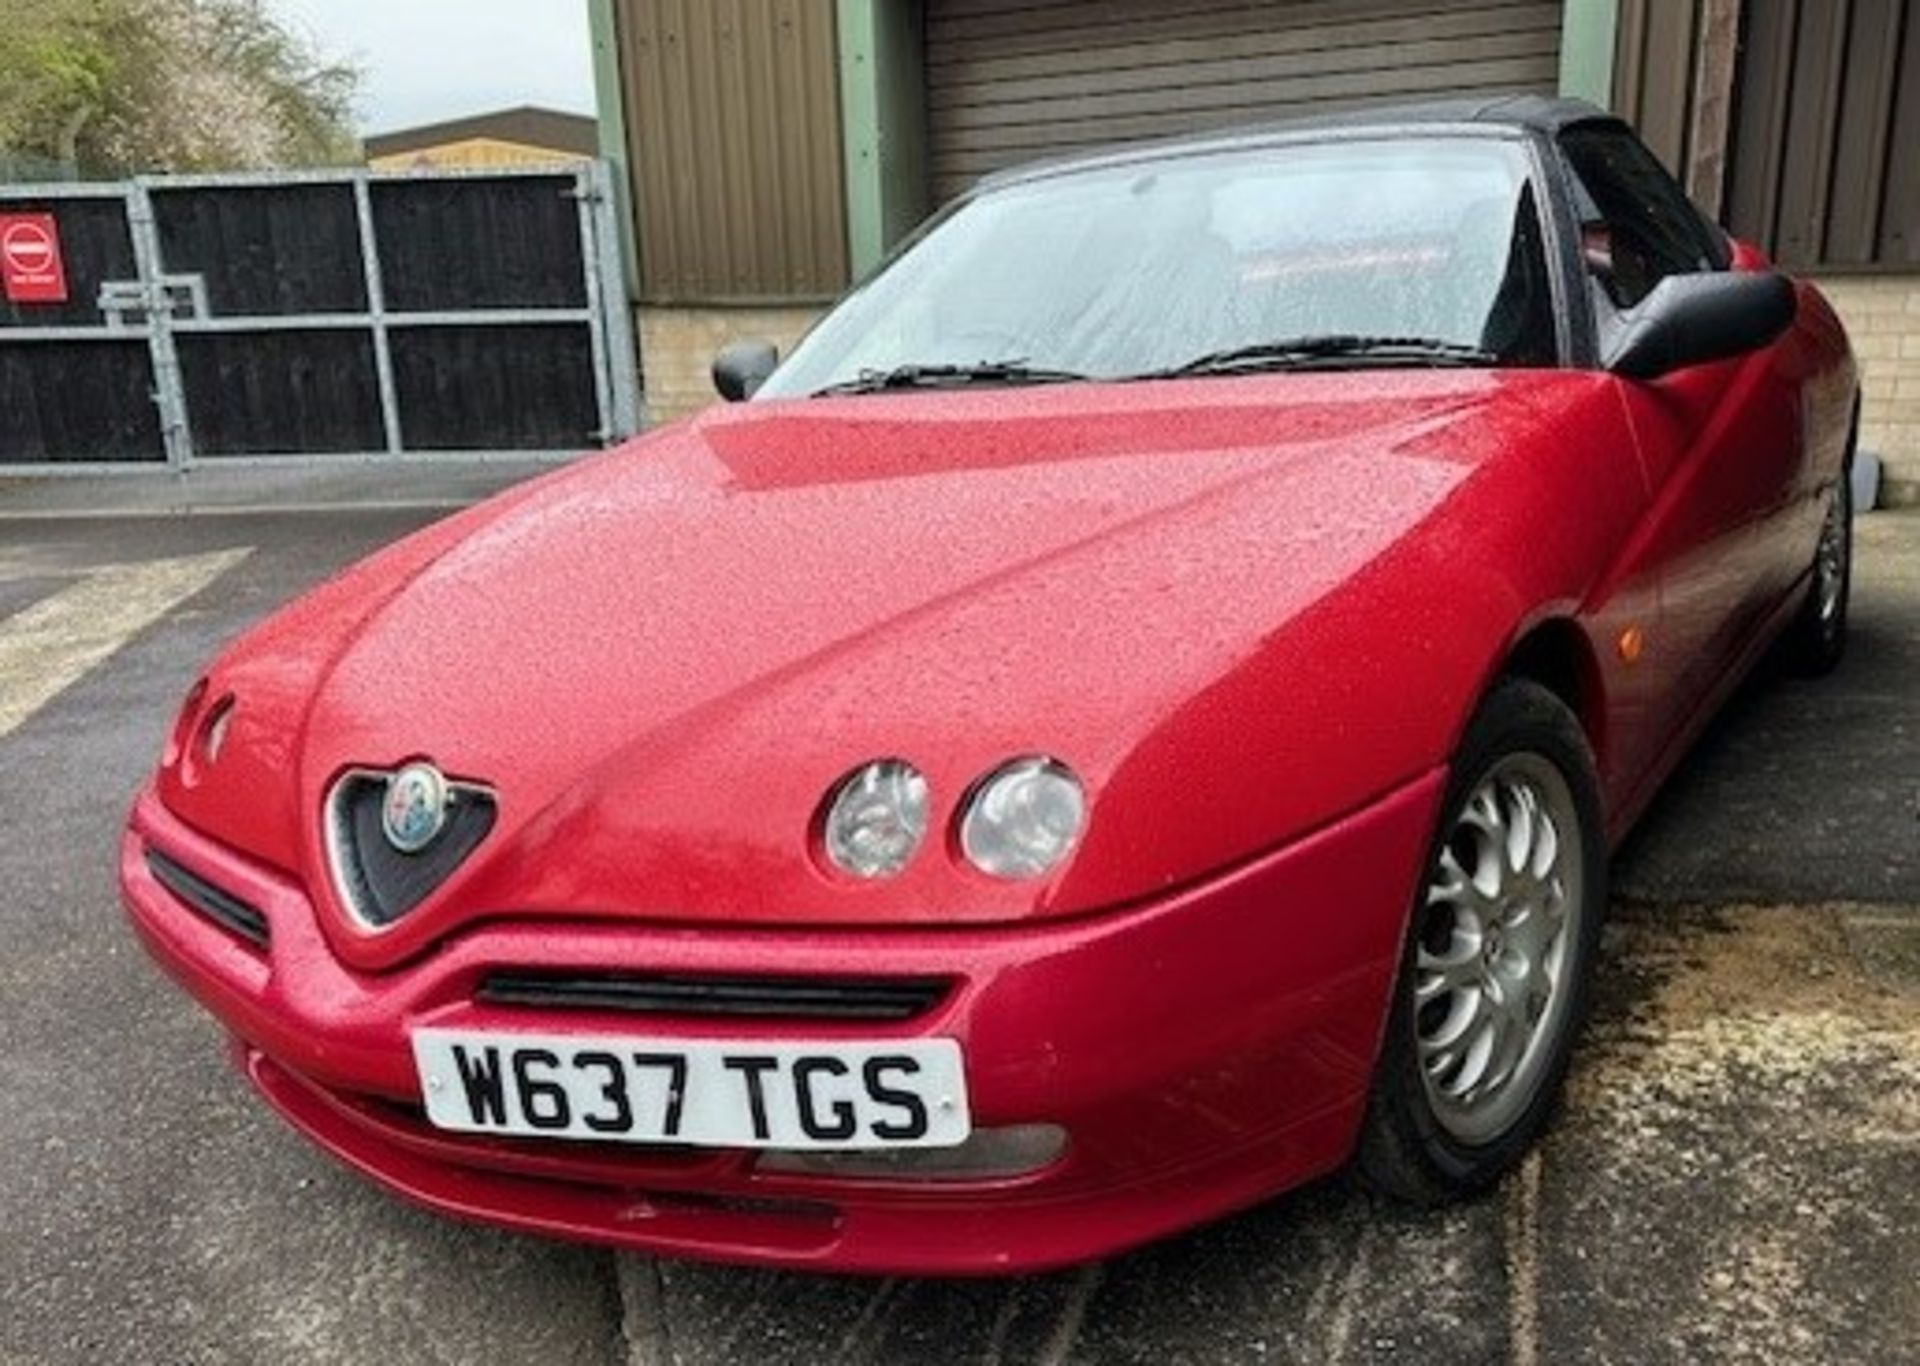 2000 Alfa Romeo Spider Lusso TS Spider Registration number W637 TGS Red with a black interior MOT